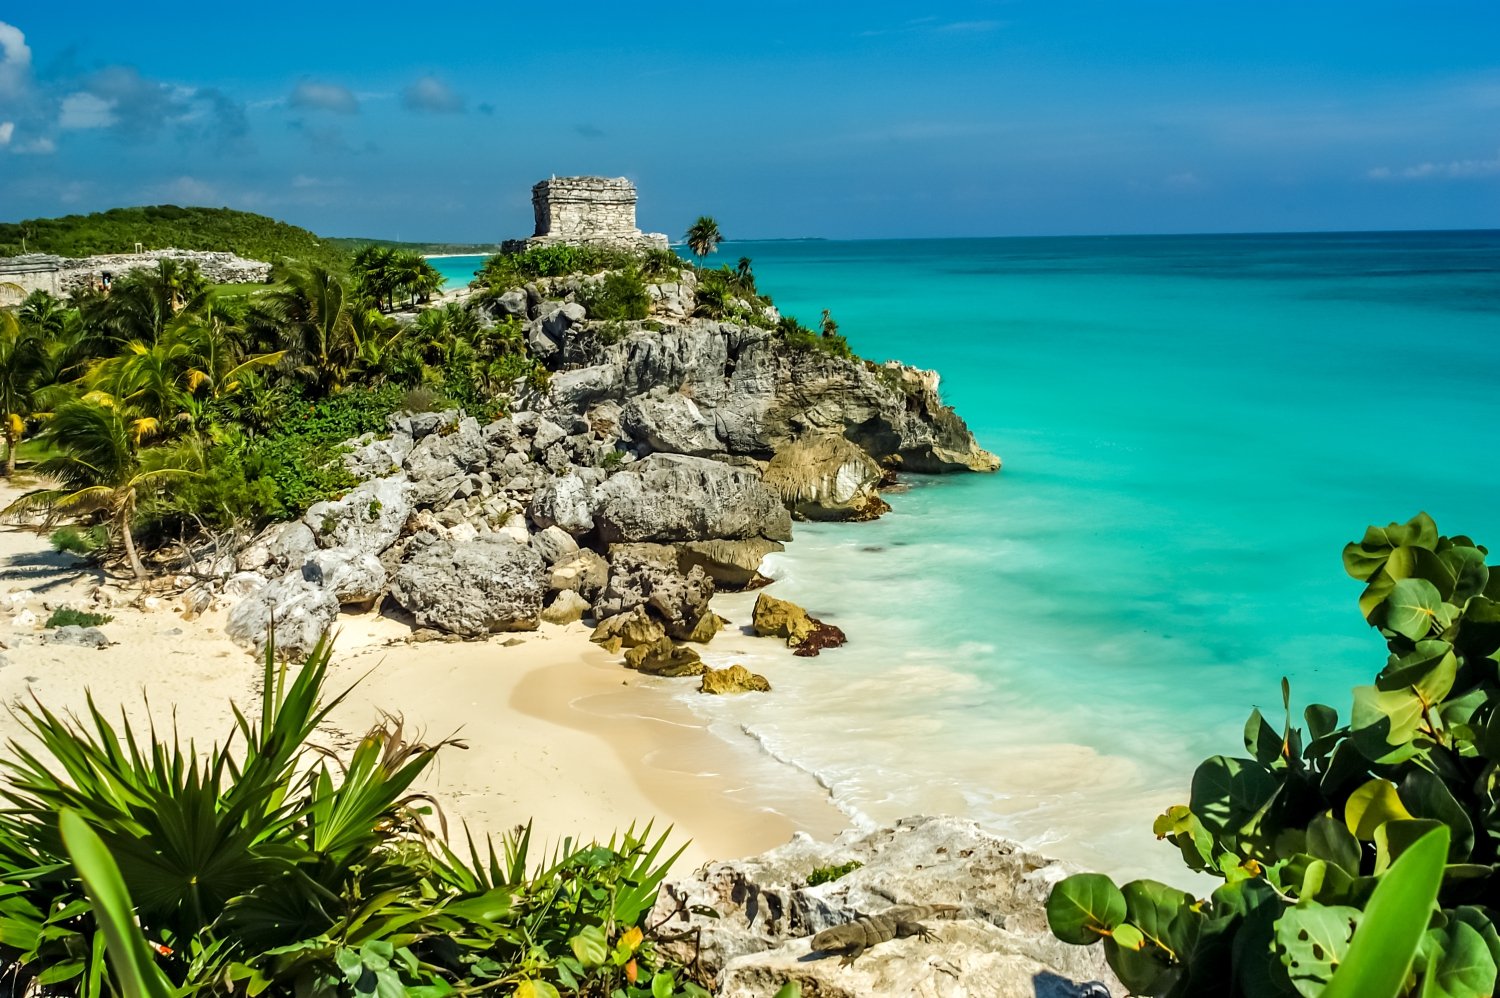 Tips for traveling to Cancun